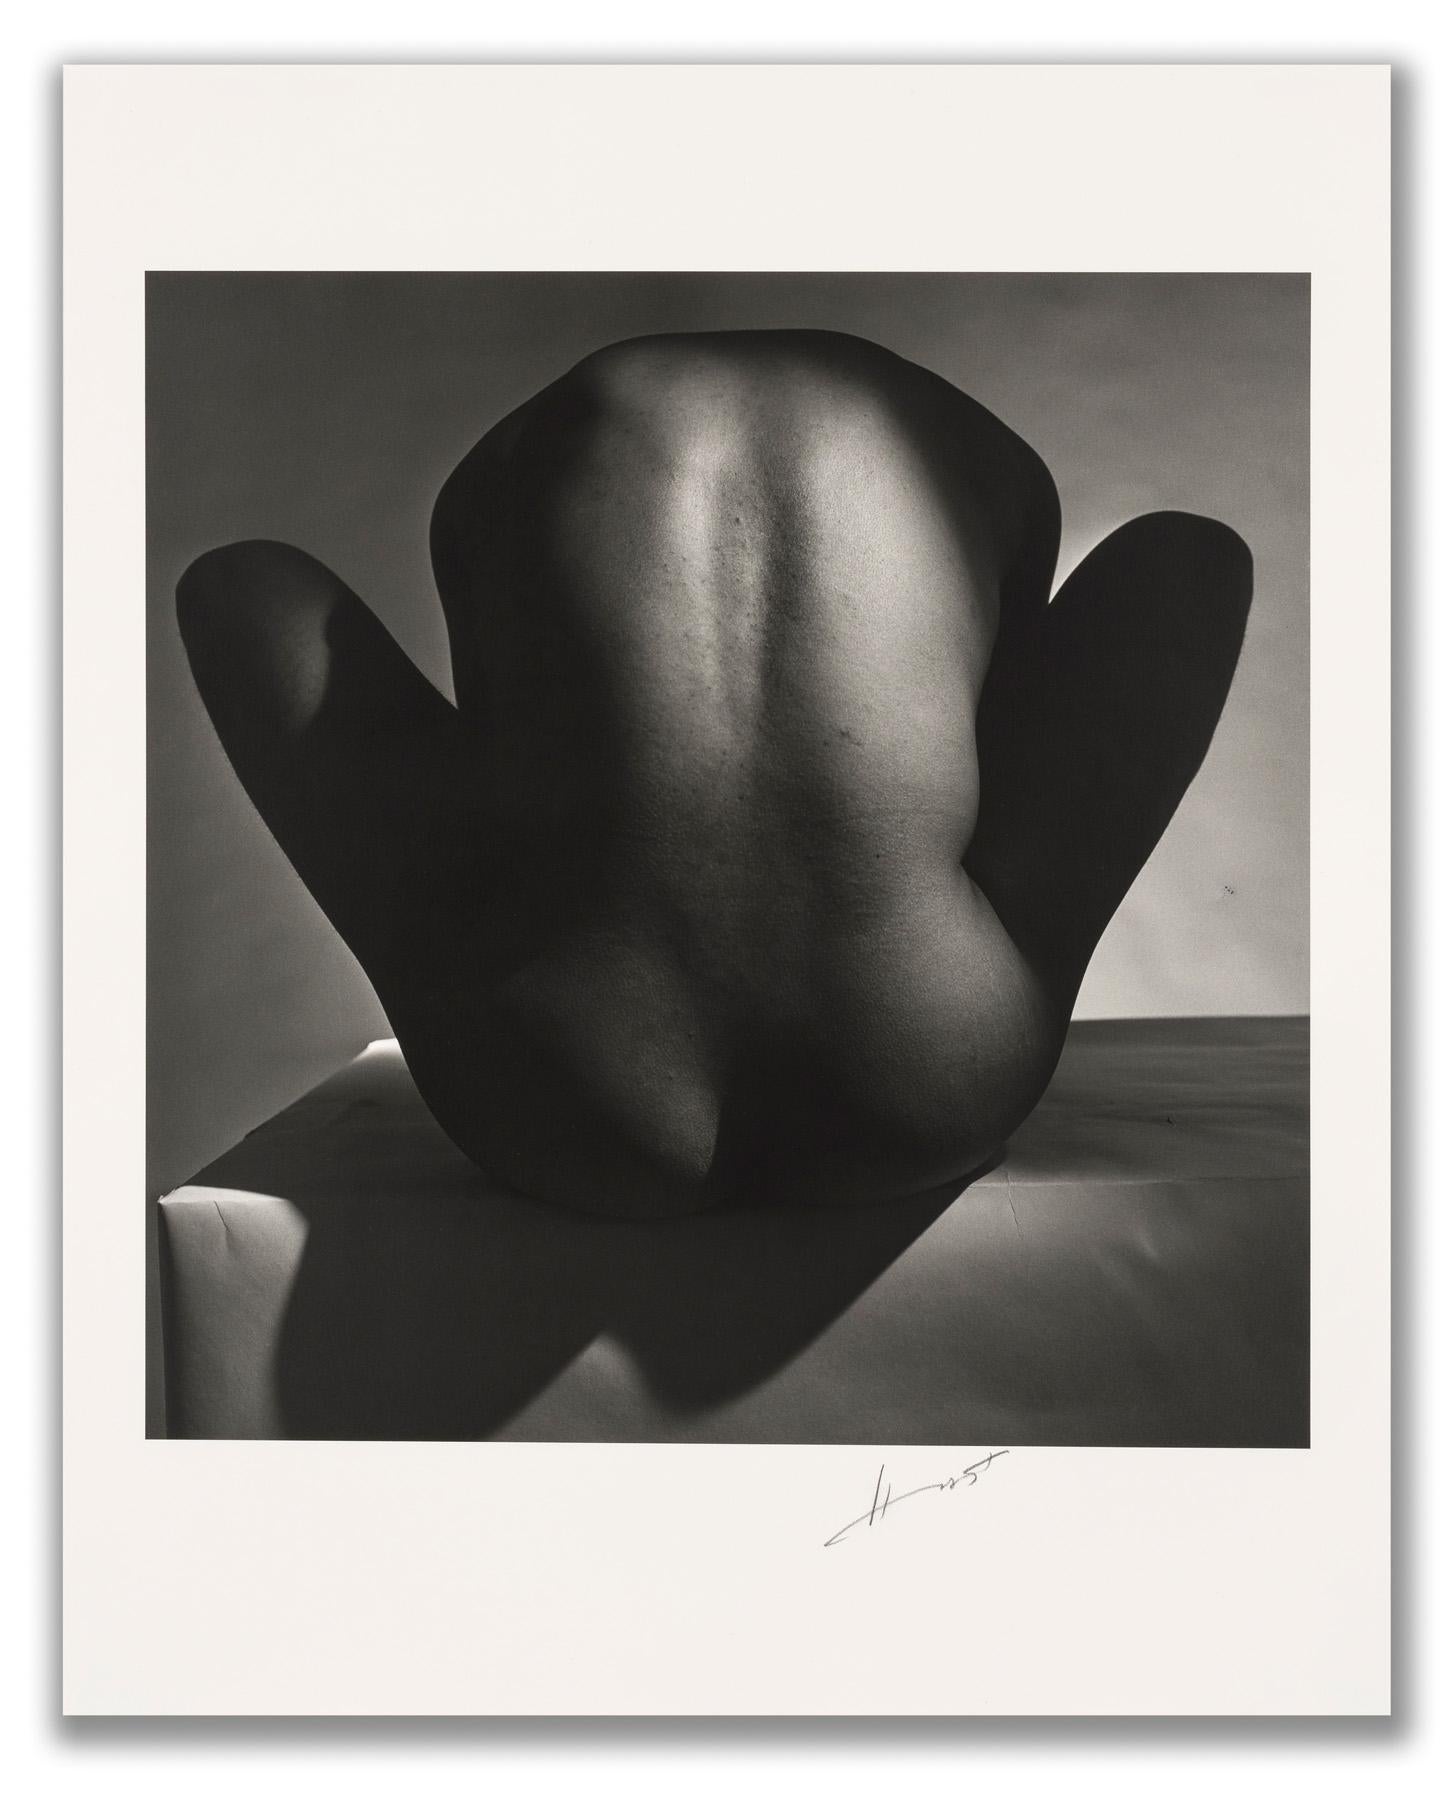 Male Nude II - Photograph by Horst P. Horst